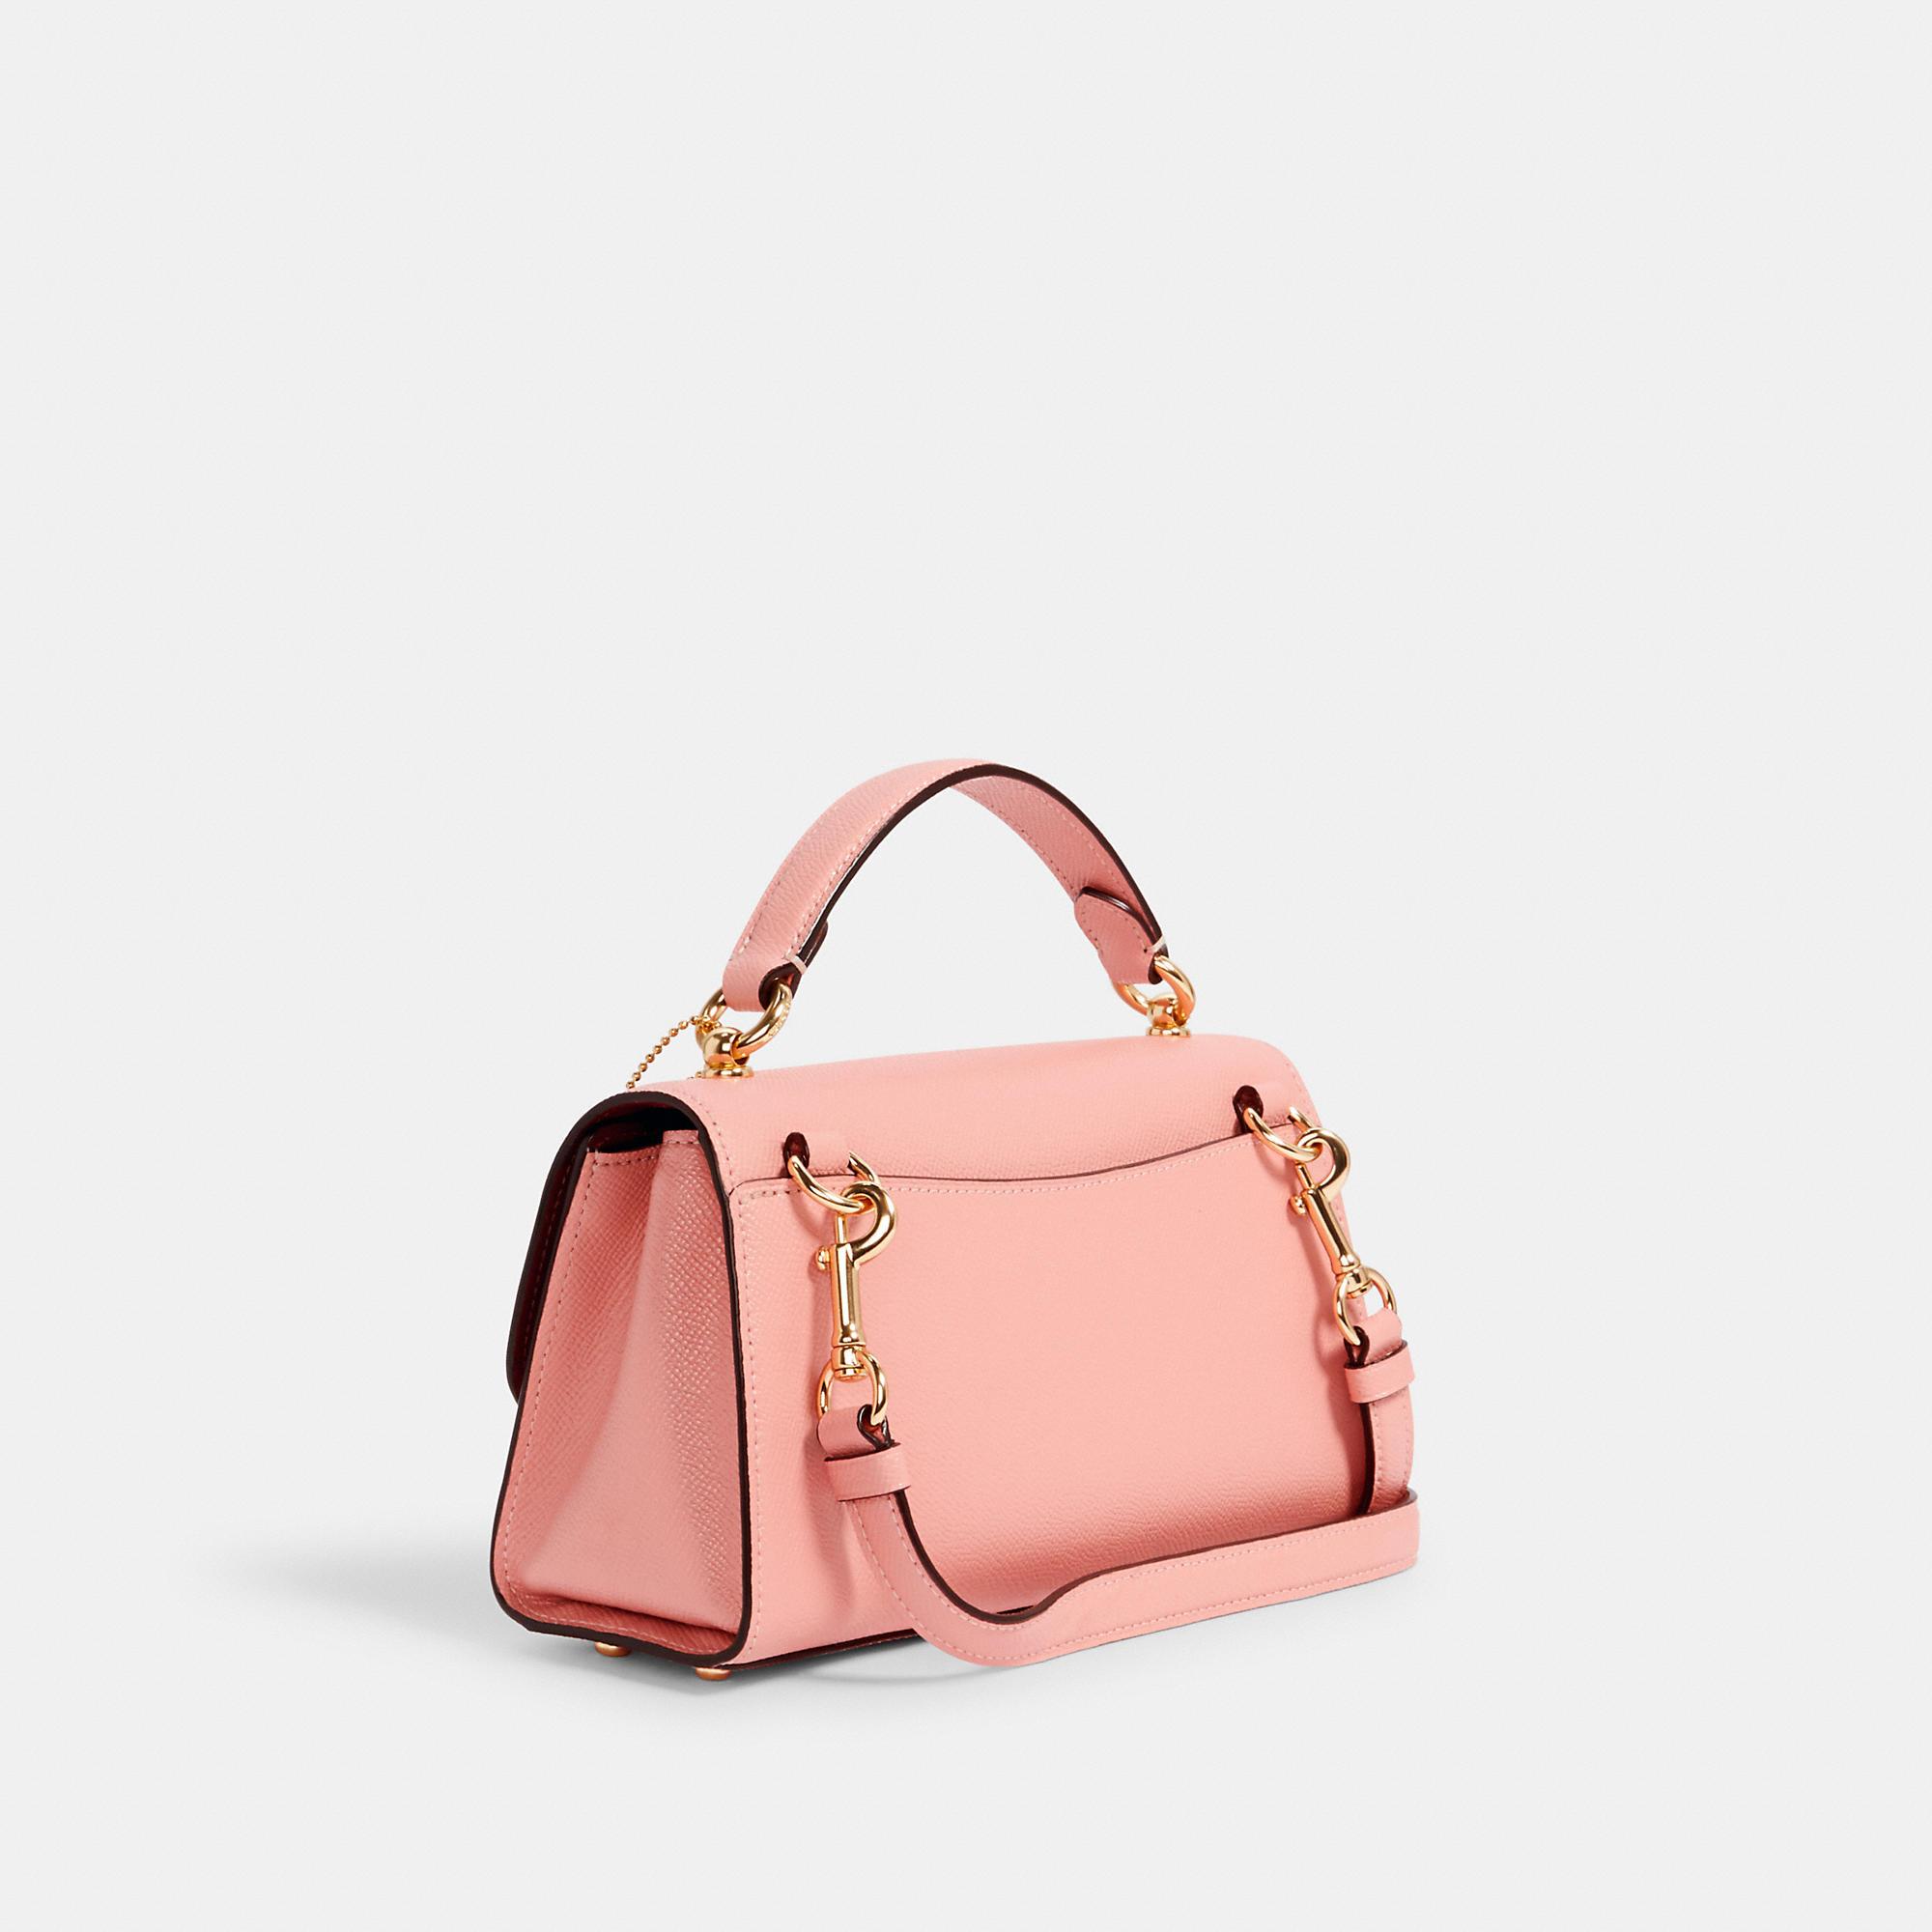 COACH Tilly Satchel 23 With Cherry in Pink